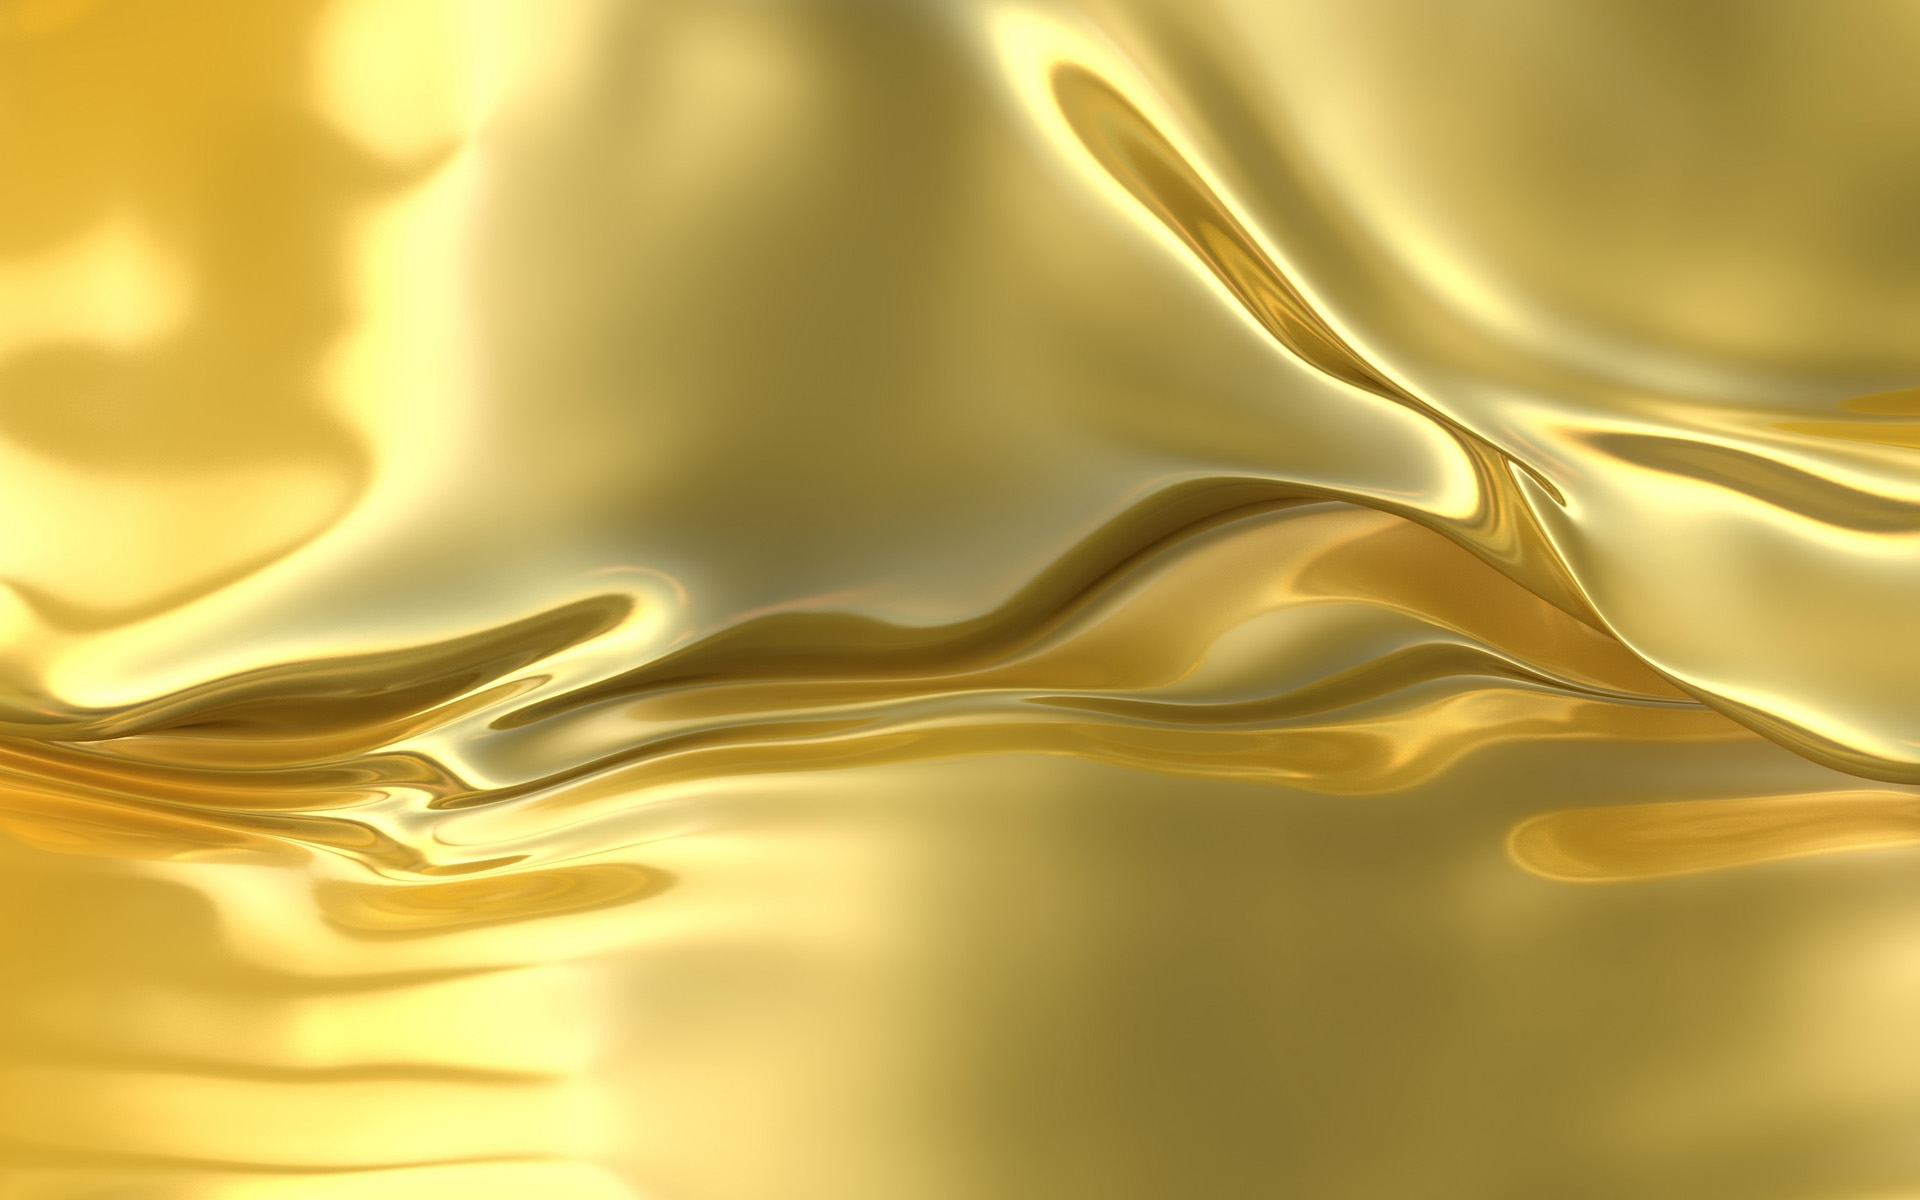 hd wallpapers golden wallpaper ouro abstract gold texture 1920x1200